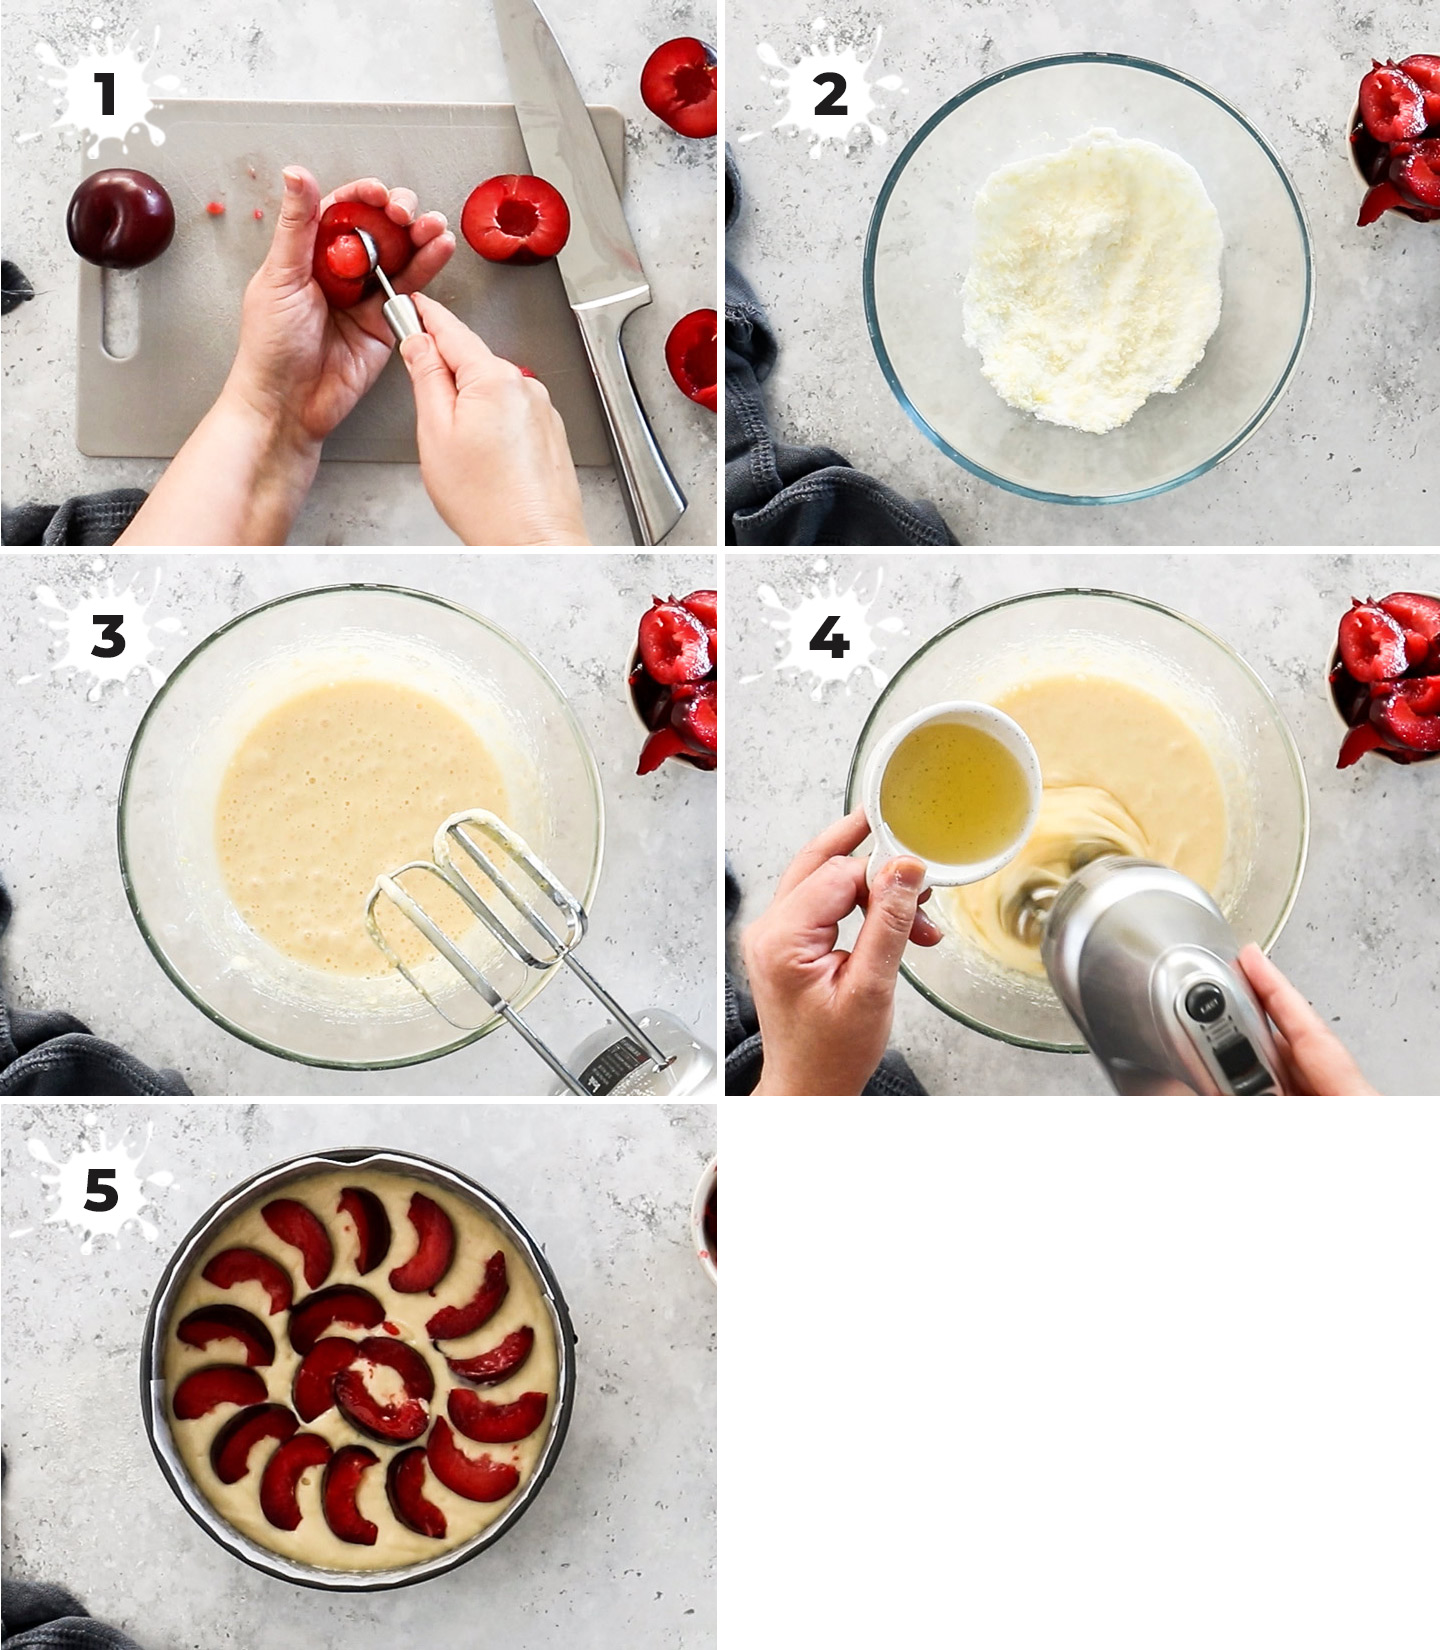 A collage showing how to make plum cake.